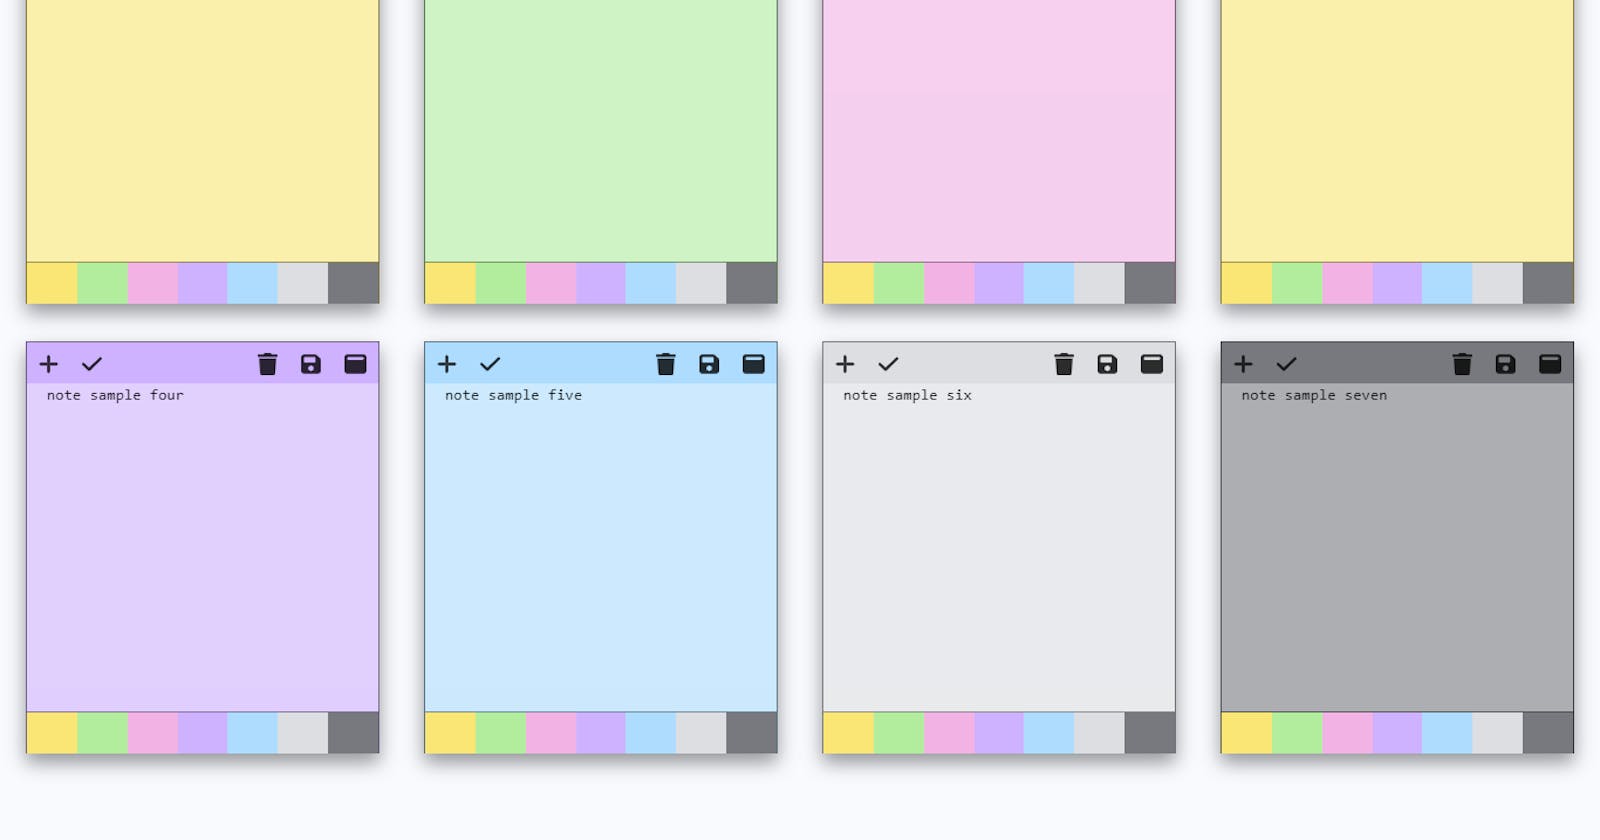 Learn Full-Stack Web Development with React and GraphQL by Building a Sticky Note App - Part three